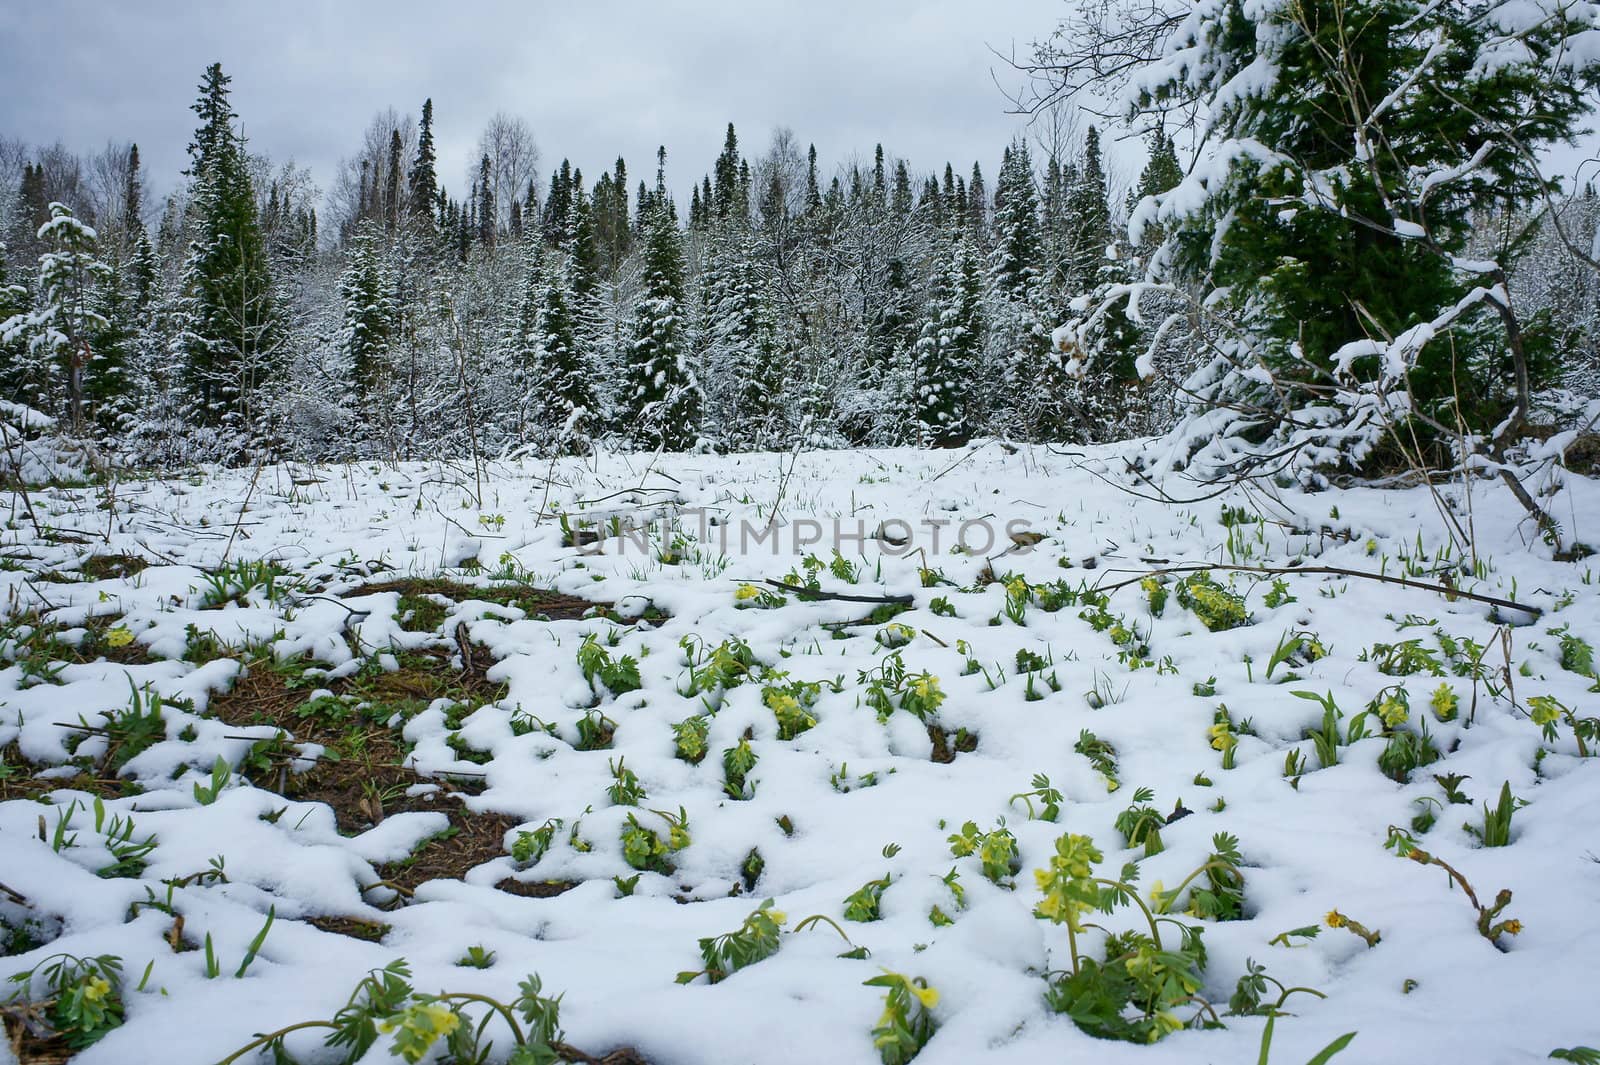 Spring flowers covered with snow in a forest.